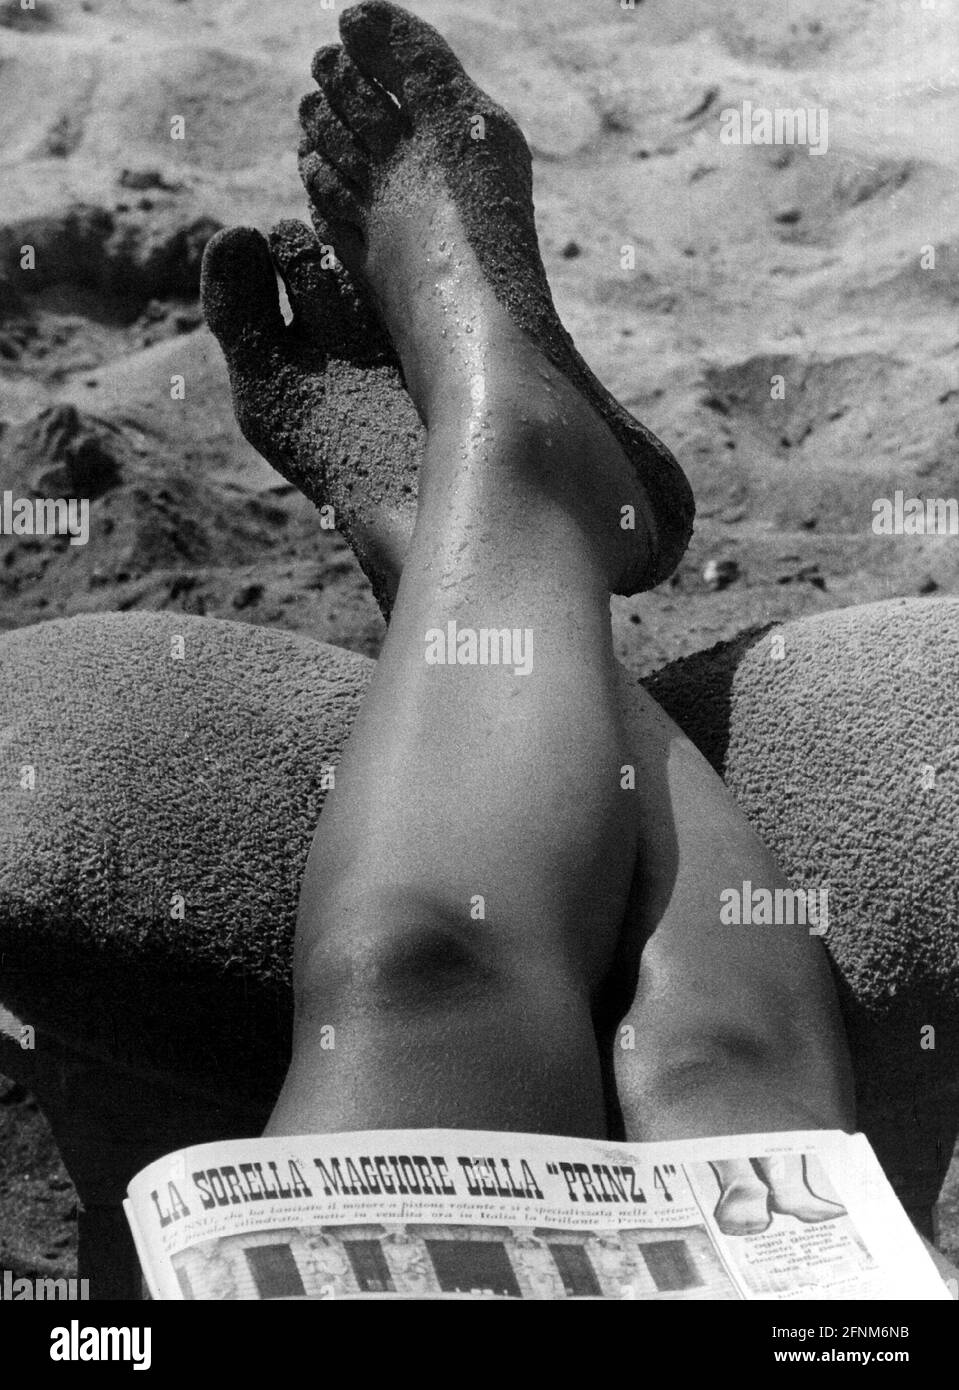 Tourismus, Strandleben, Beine im Sand, Italien, Anfang der 1970er Jahre, ADDITIONAL-RIGHTS-CLEARANCE-INFO-NOT-AVAILABLE Stockfoto